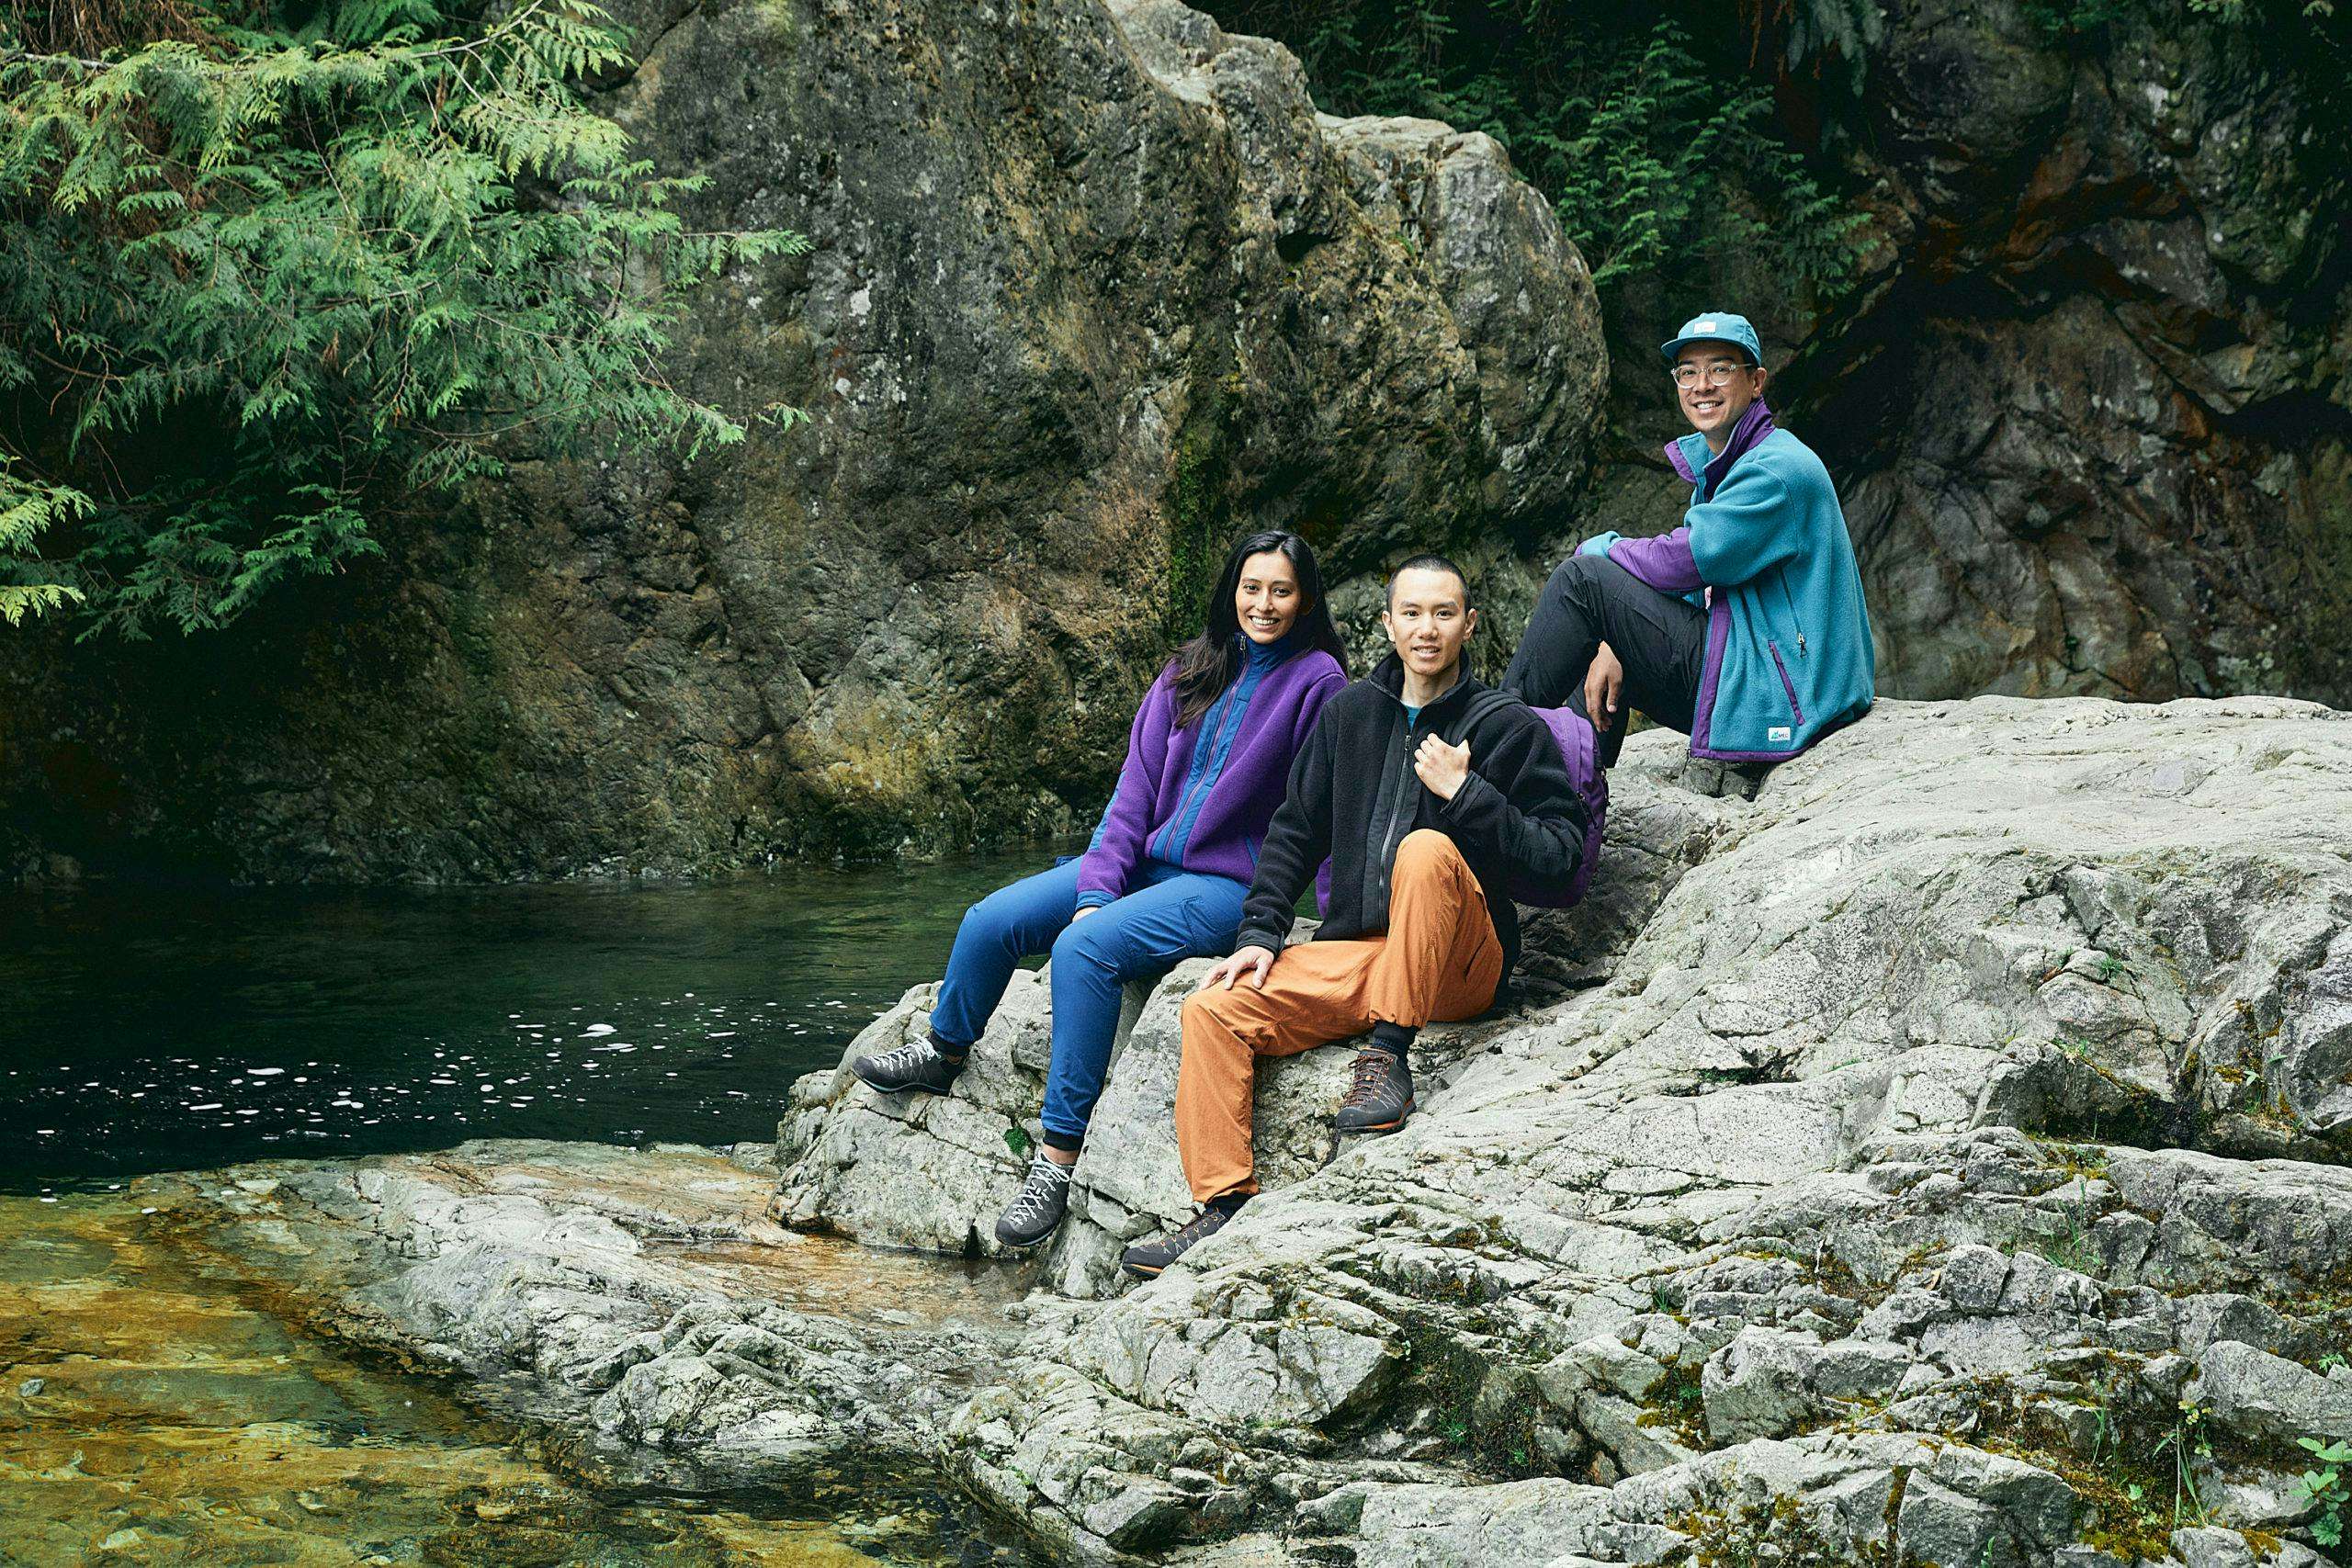 Three people sitting on rocks next to a river, wearing MEC fleece jackets that look like they're from the 1990s